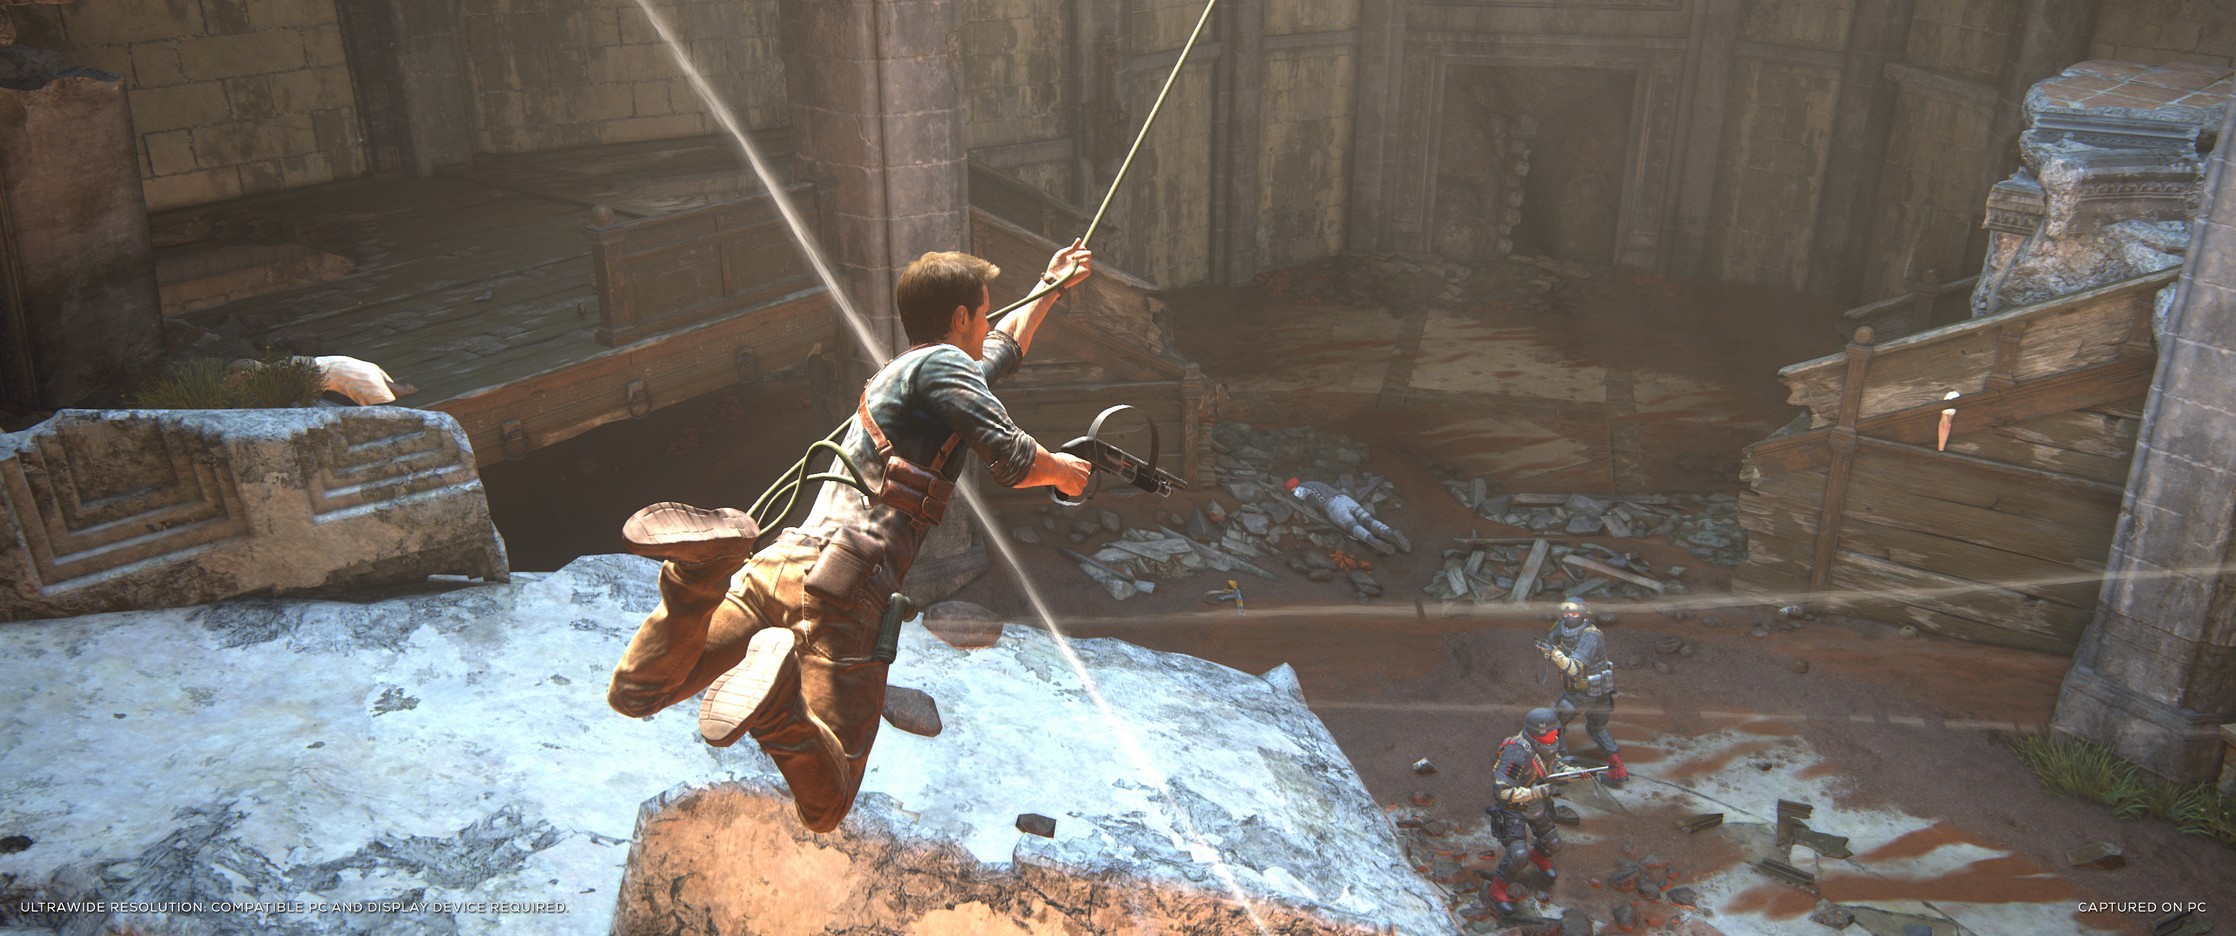 Uncharted: Legacy of Thieves Collection PC vs. PS5 Performance